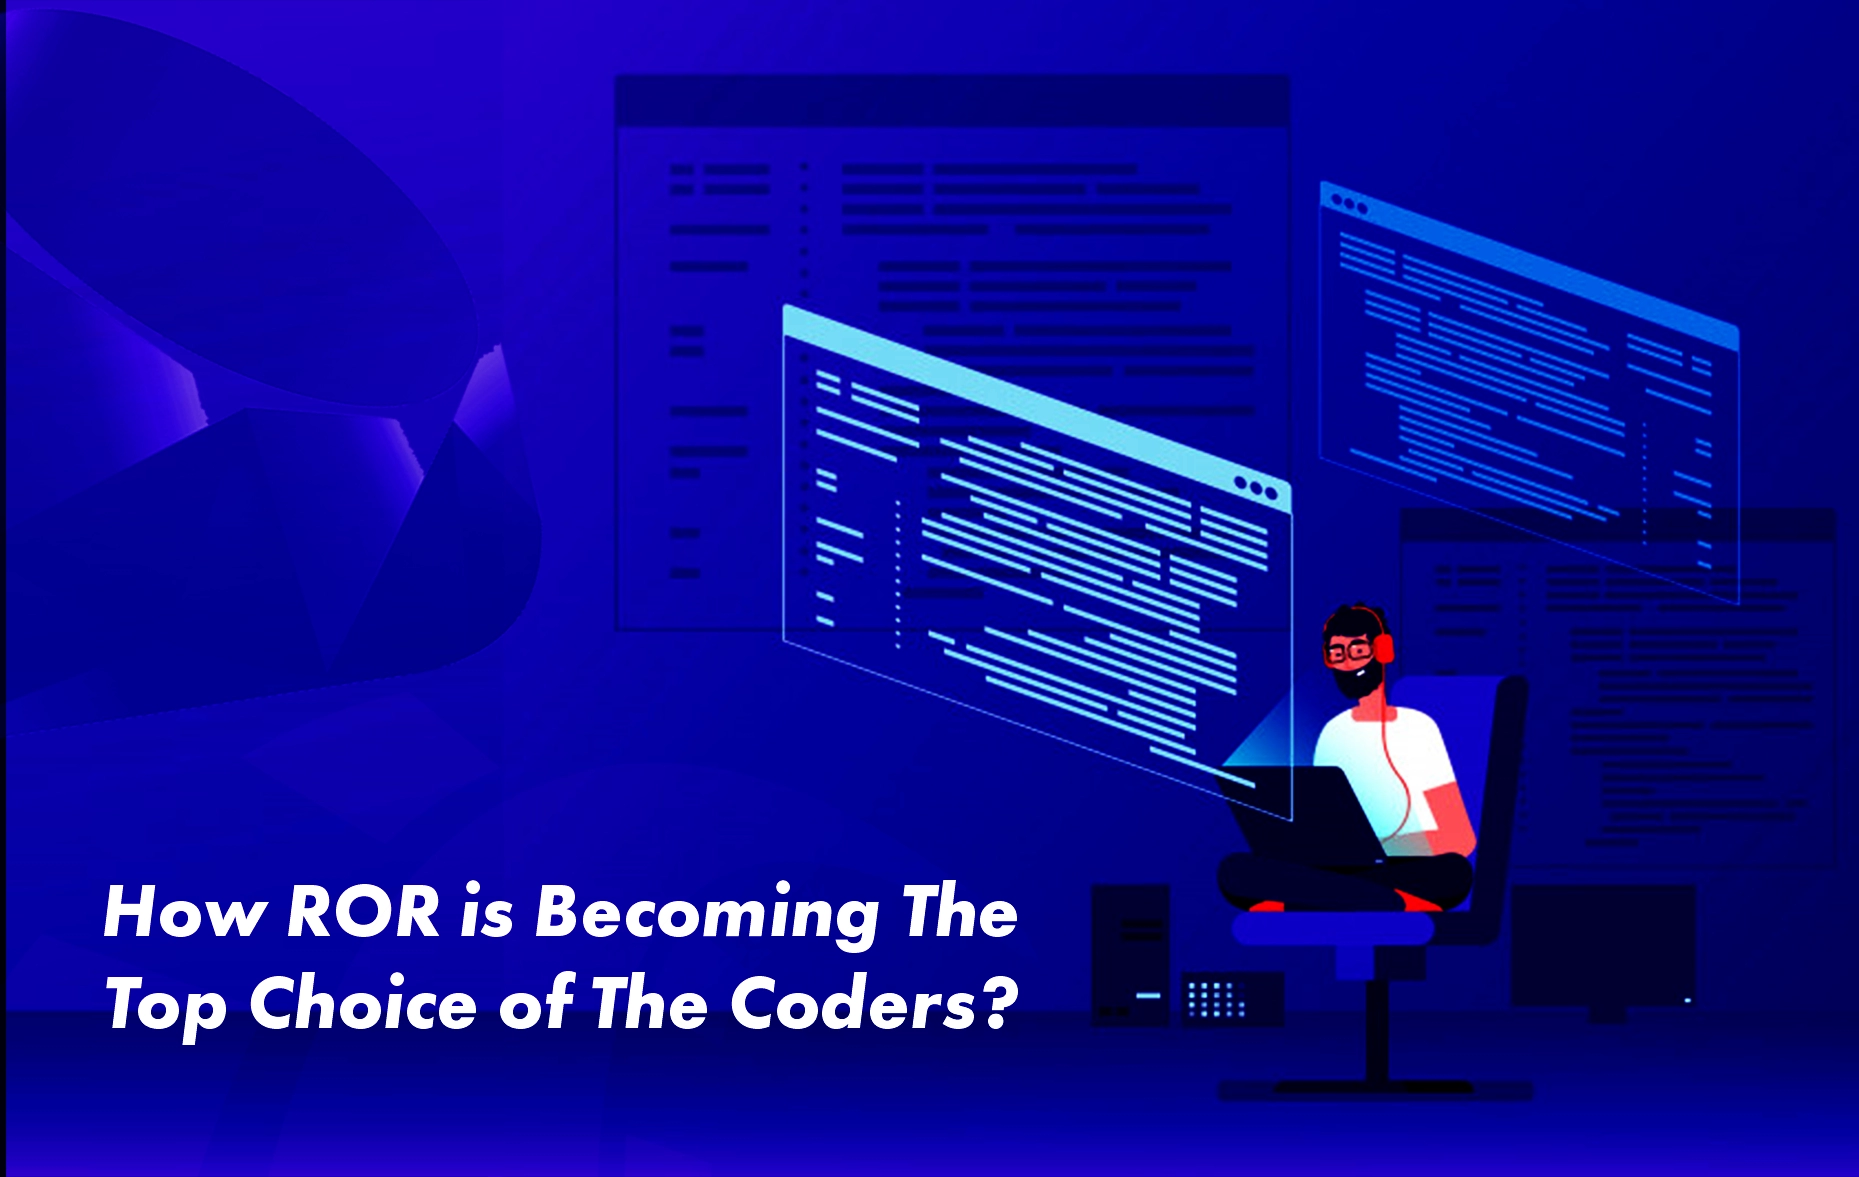 How Ruby on Rails is becoming the top choice of the coders?